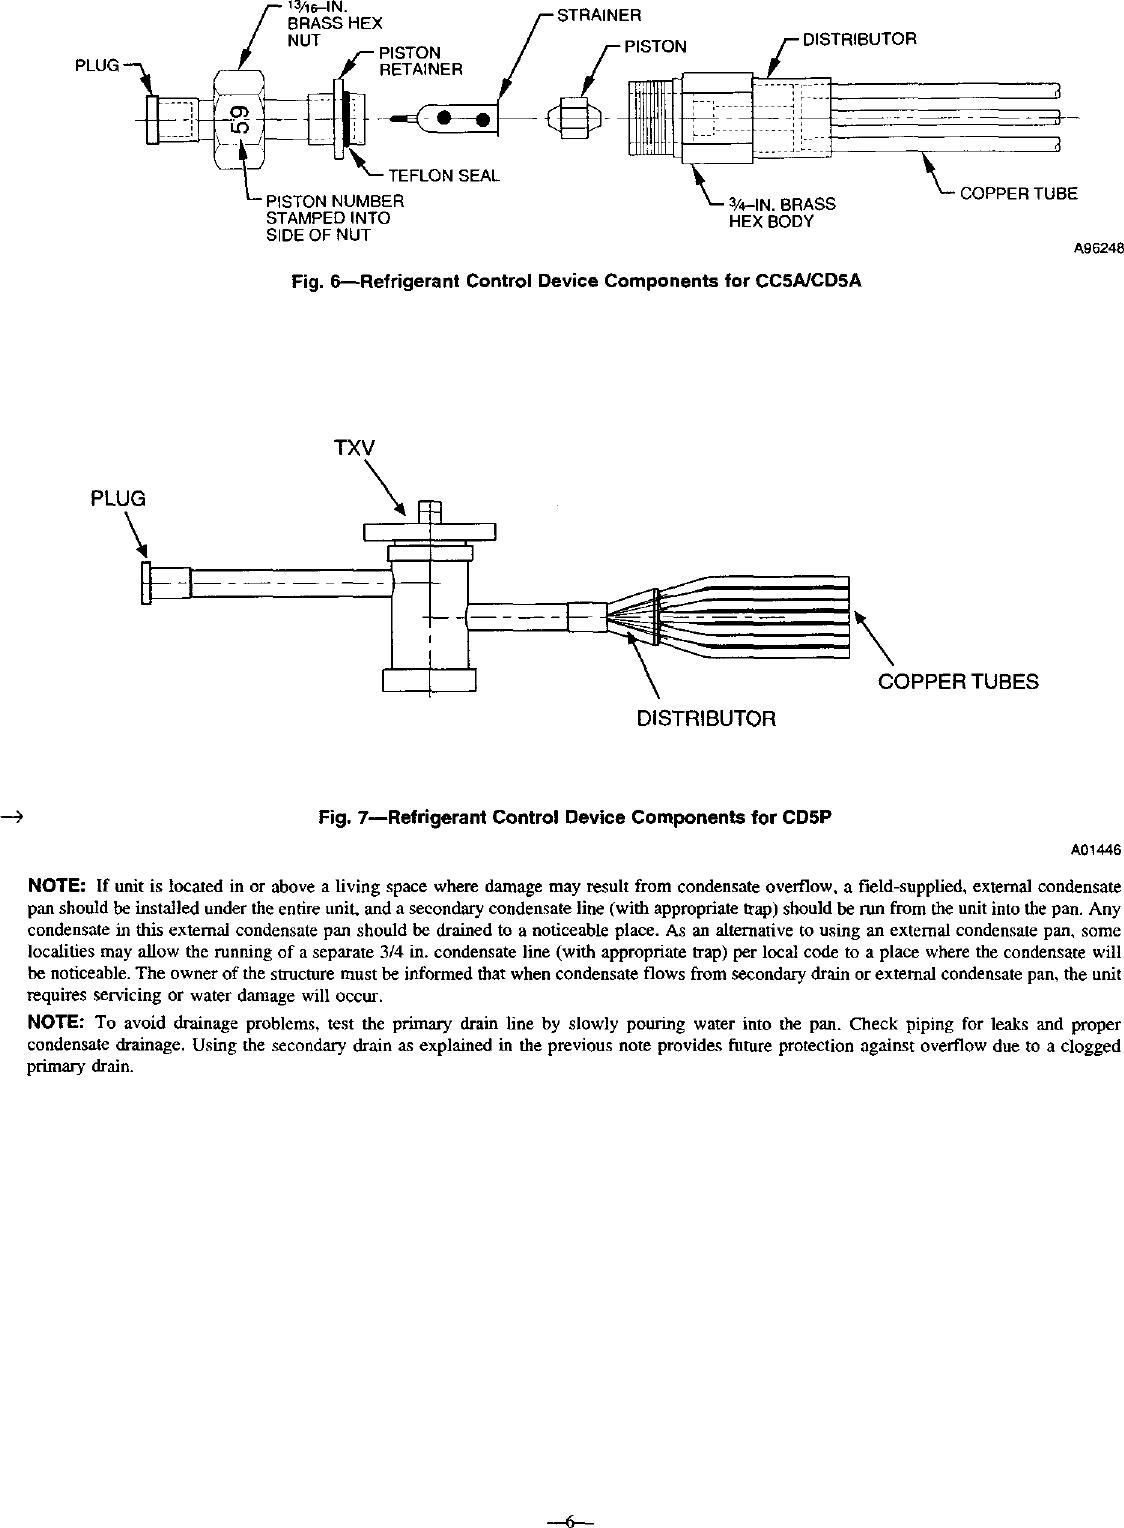 Page 6 of 8 - CARRIER  Evaporator Coils Manual L0211040